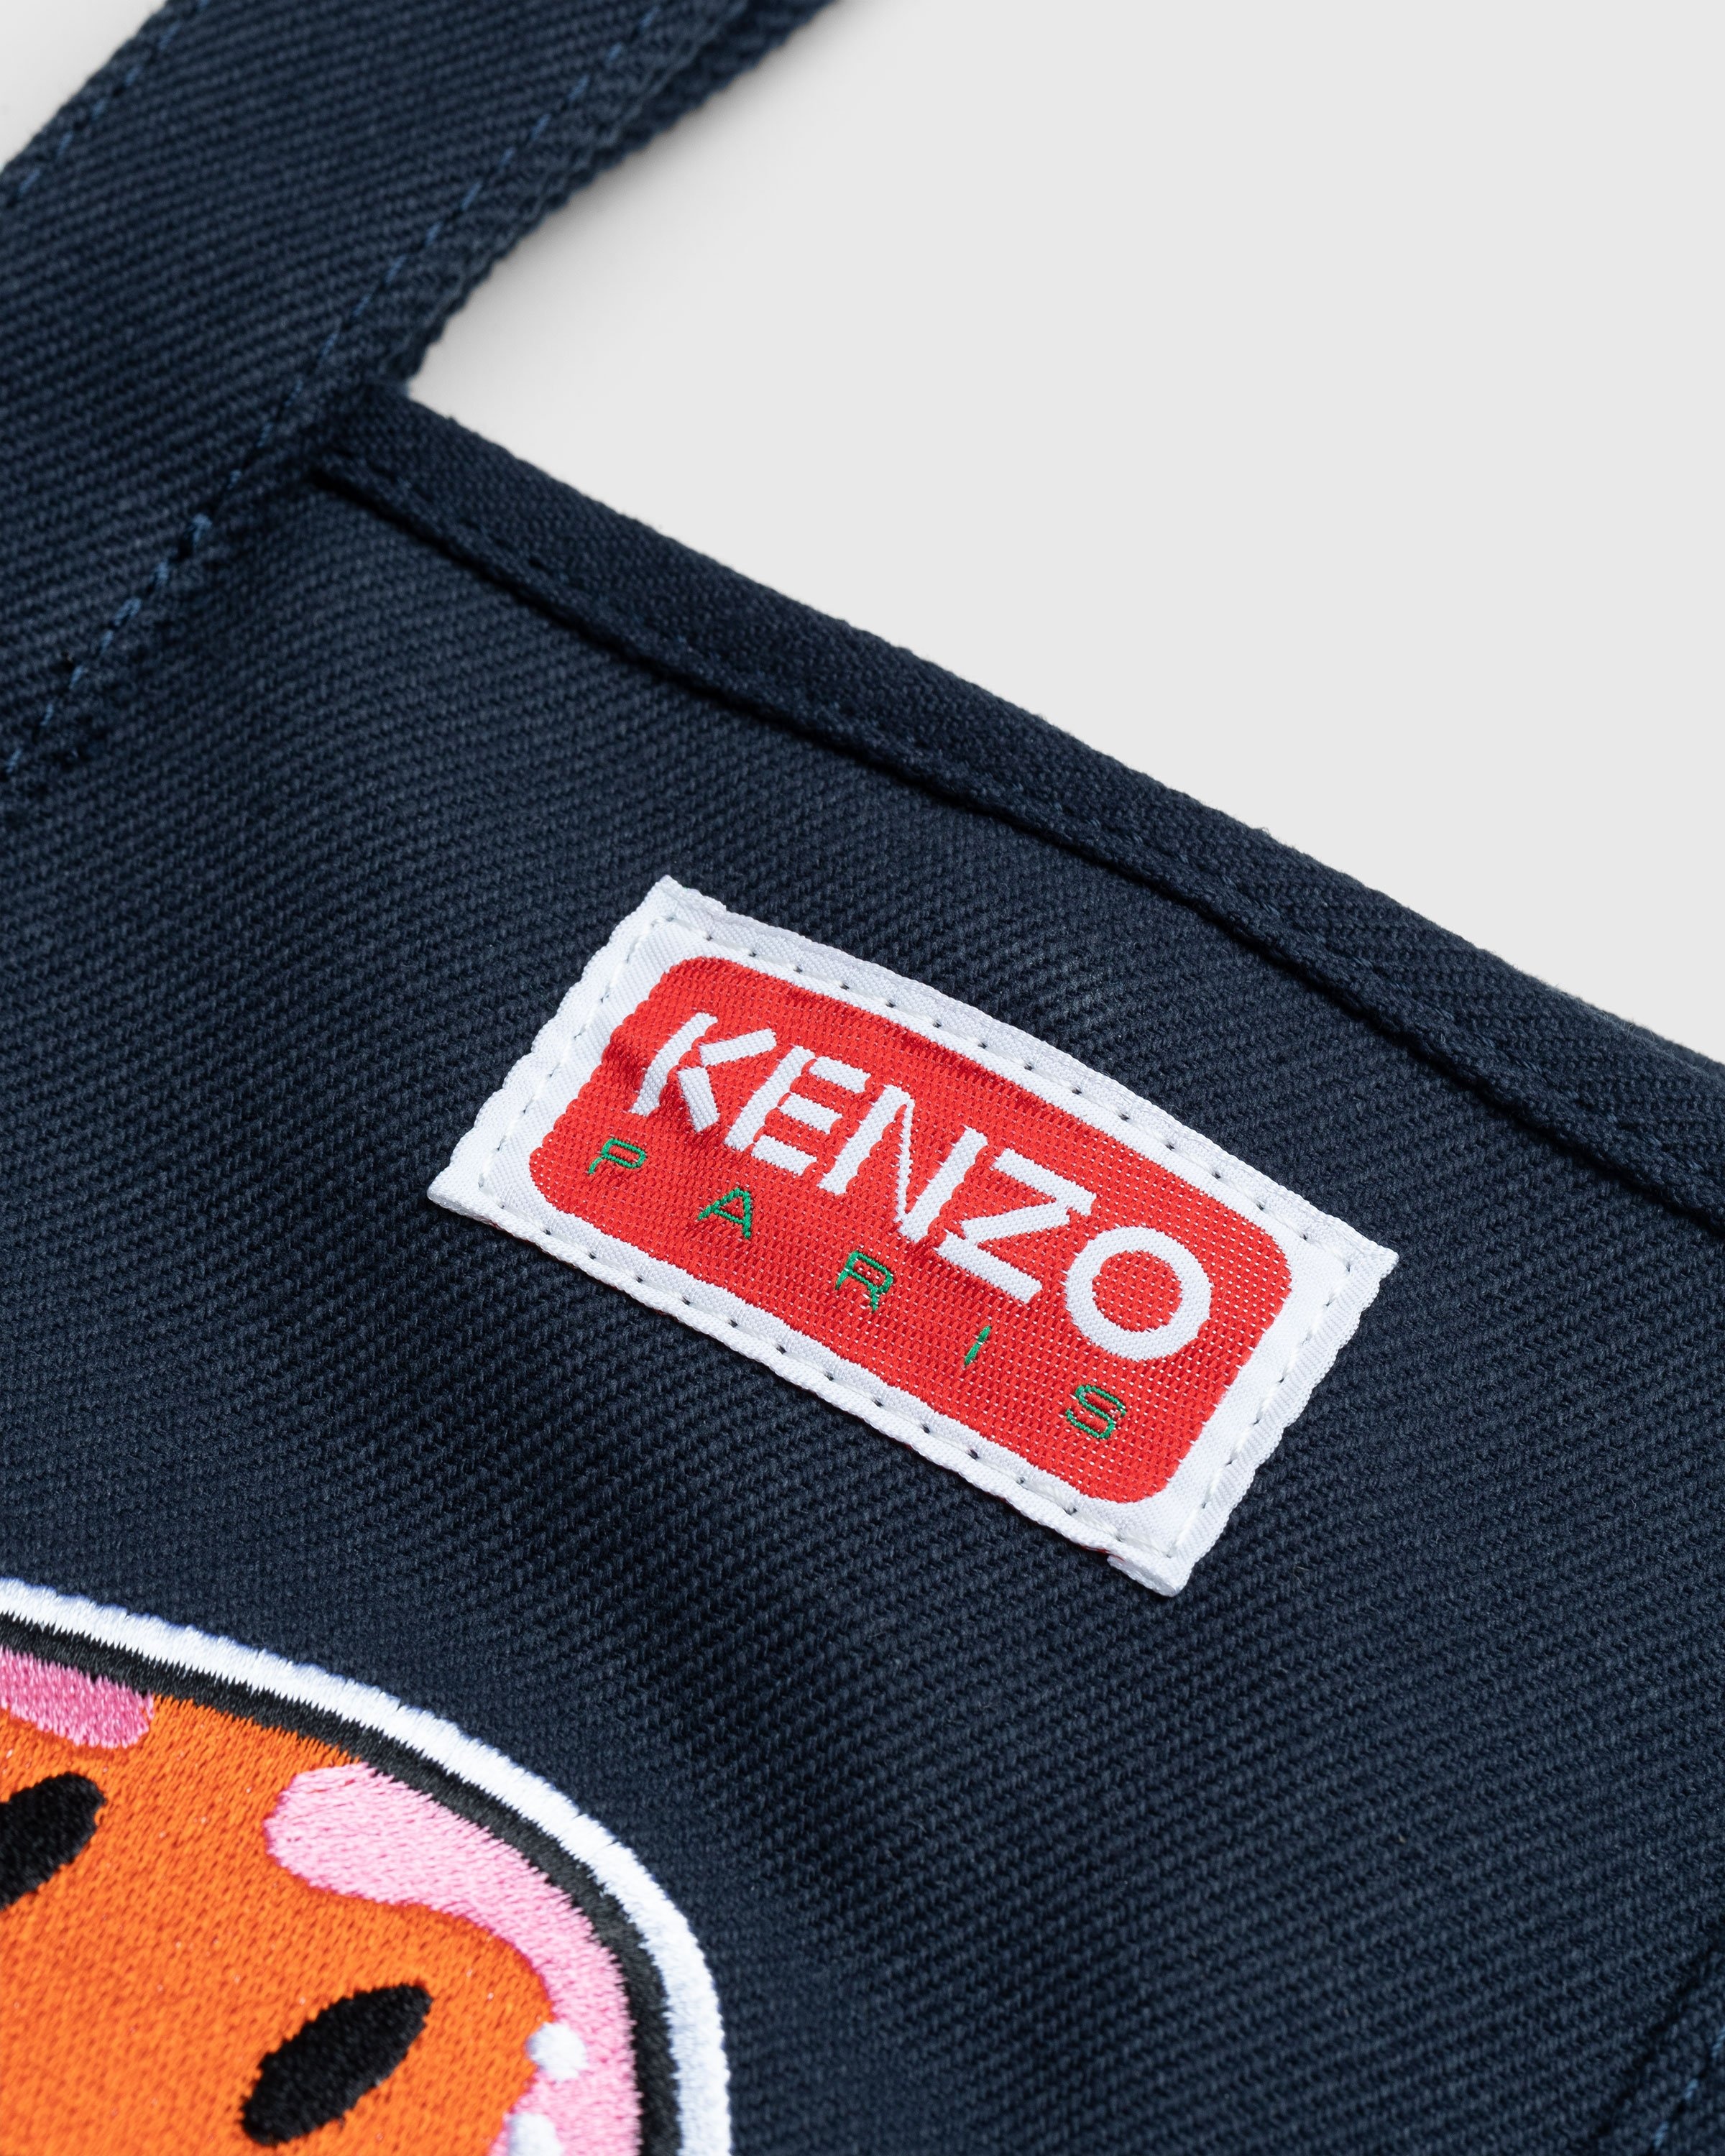 Kenzo Launches A Tote Bag Designed By Nigo - BAGAHOLICBOY